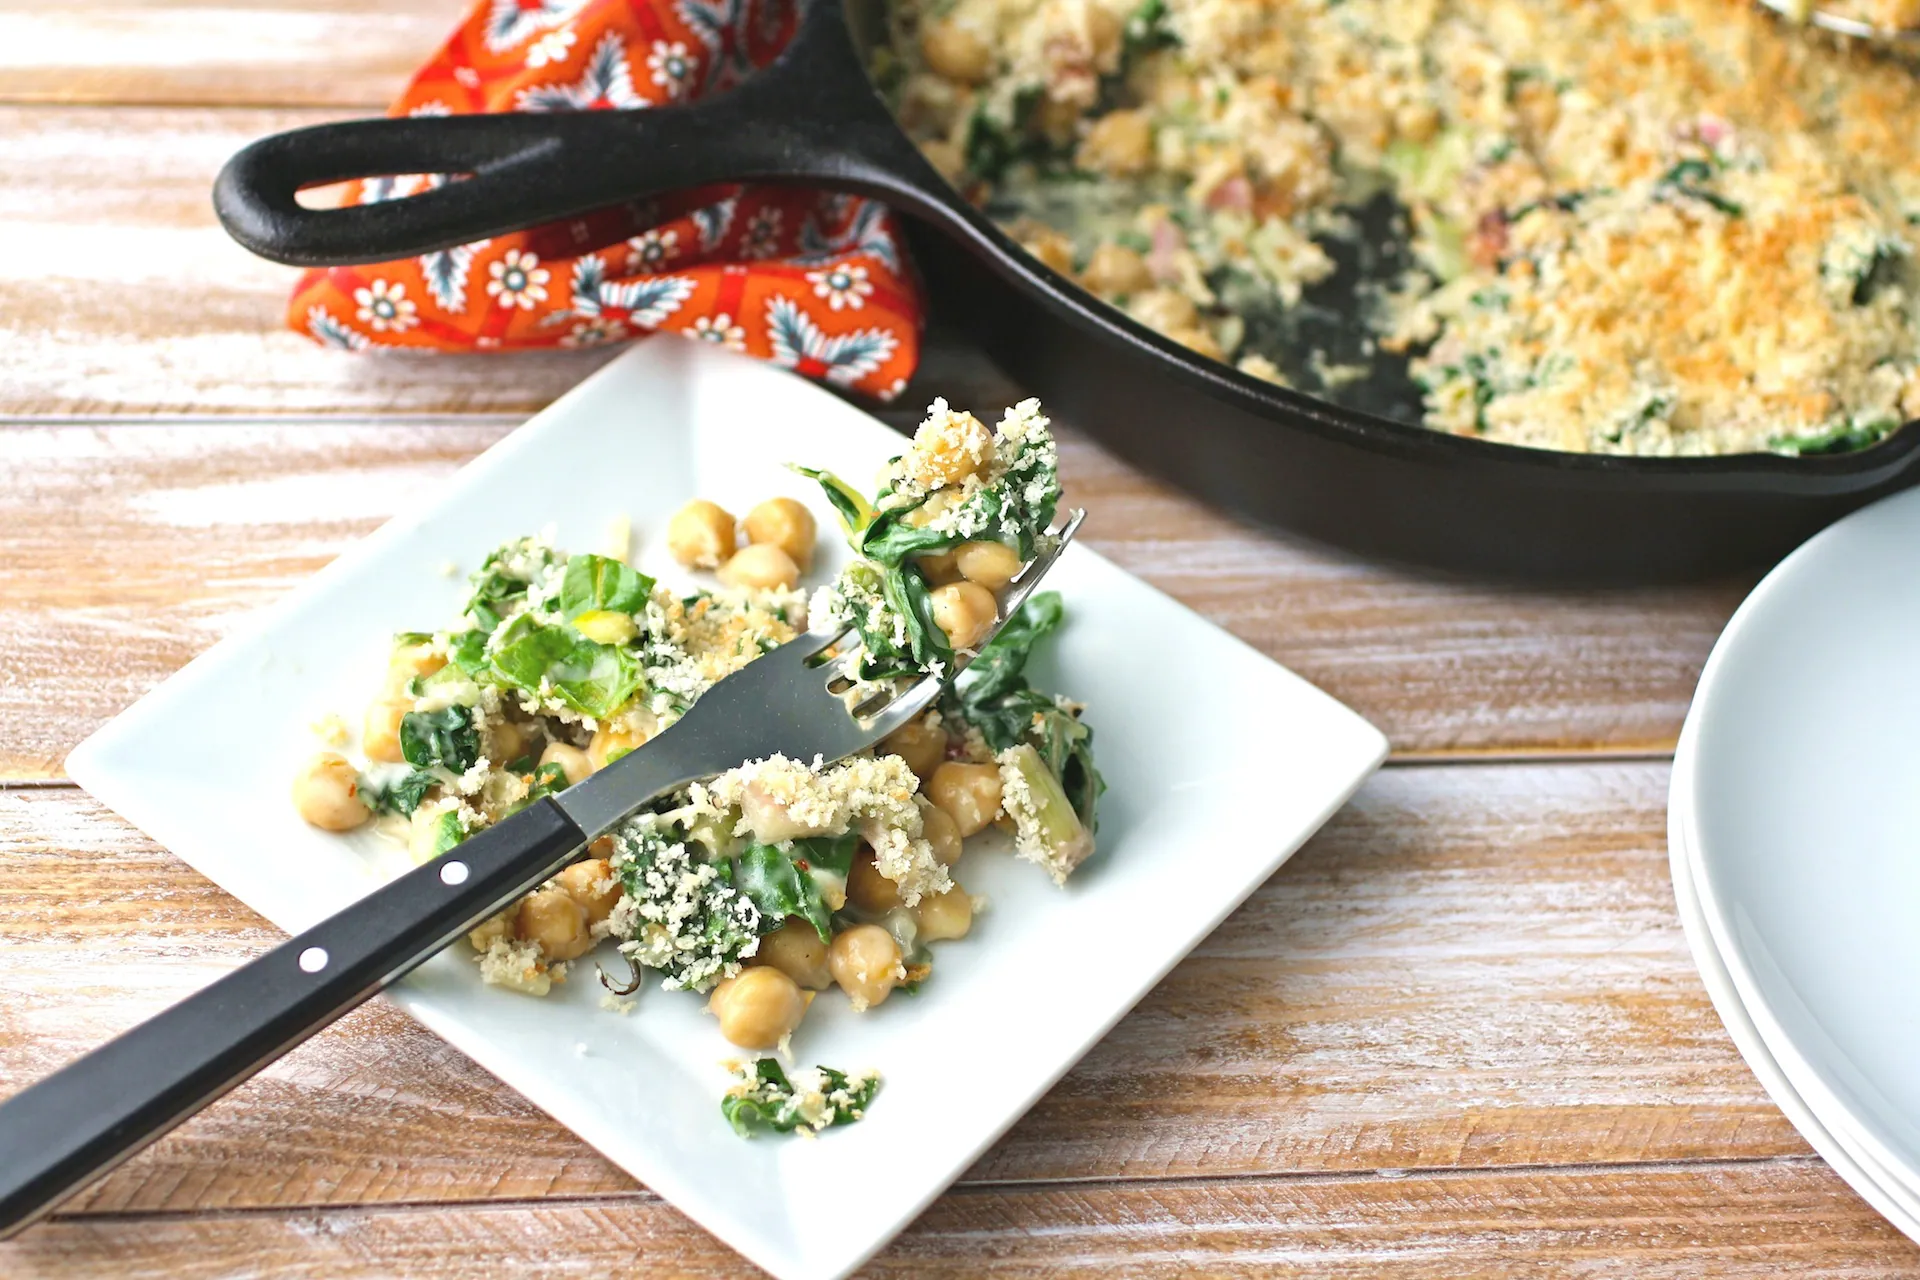 Dig in to a dish of Creamy Skillet Swiss Chard and Chickpeas with Crunchy Breadcrumbs